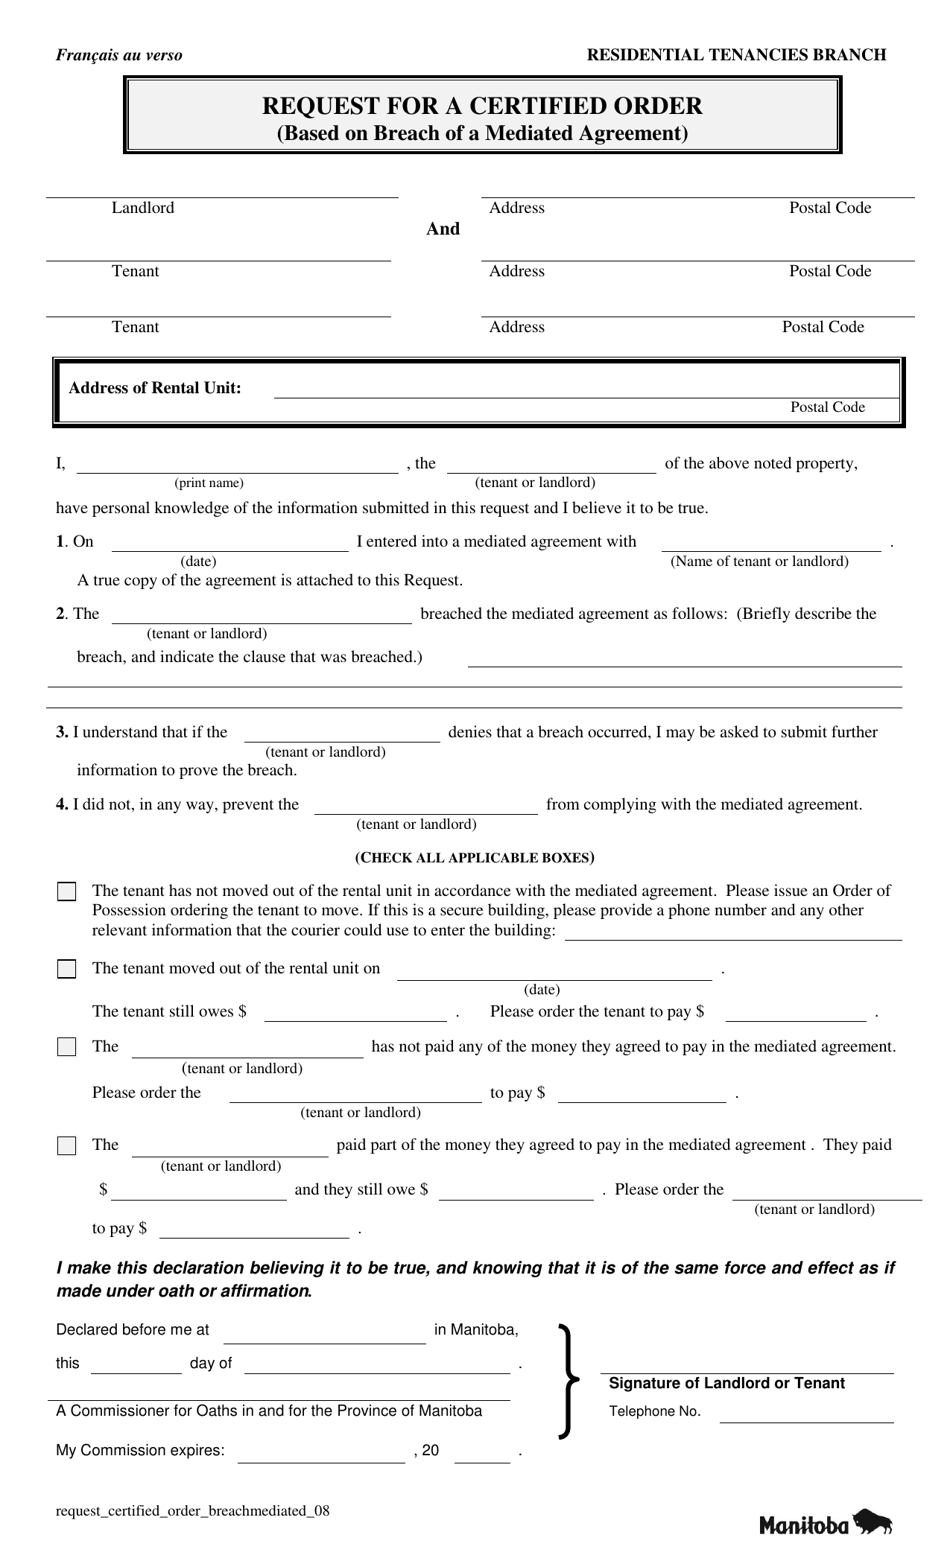 Request for a Certified Order (Based on Breach of a Mediated Agreement) - Manitoba, Canada (English / French), Page 1